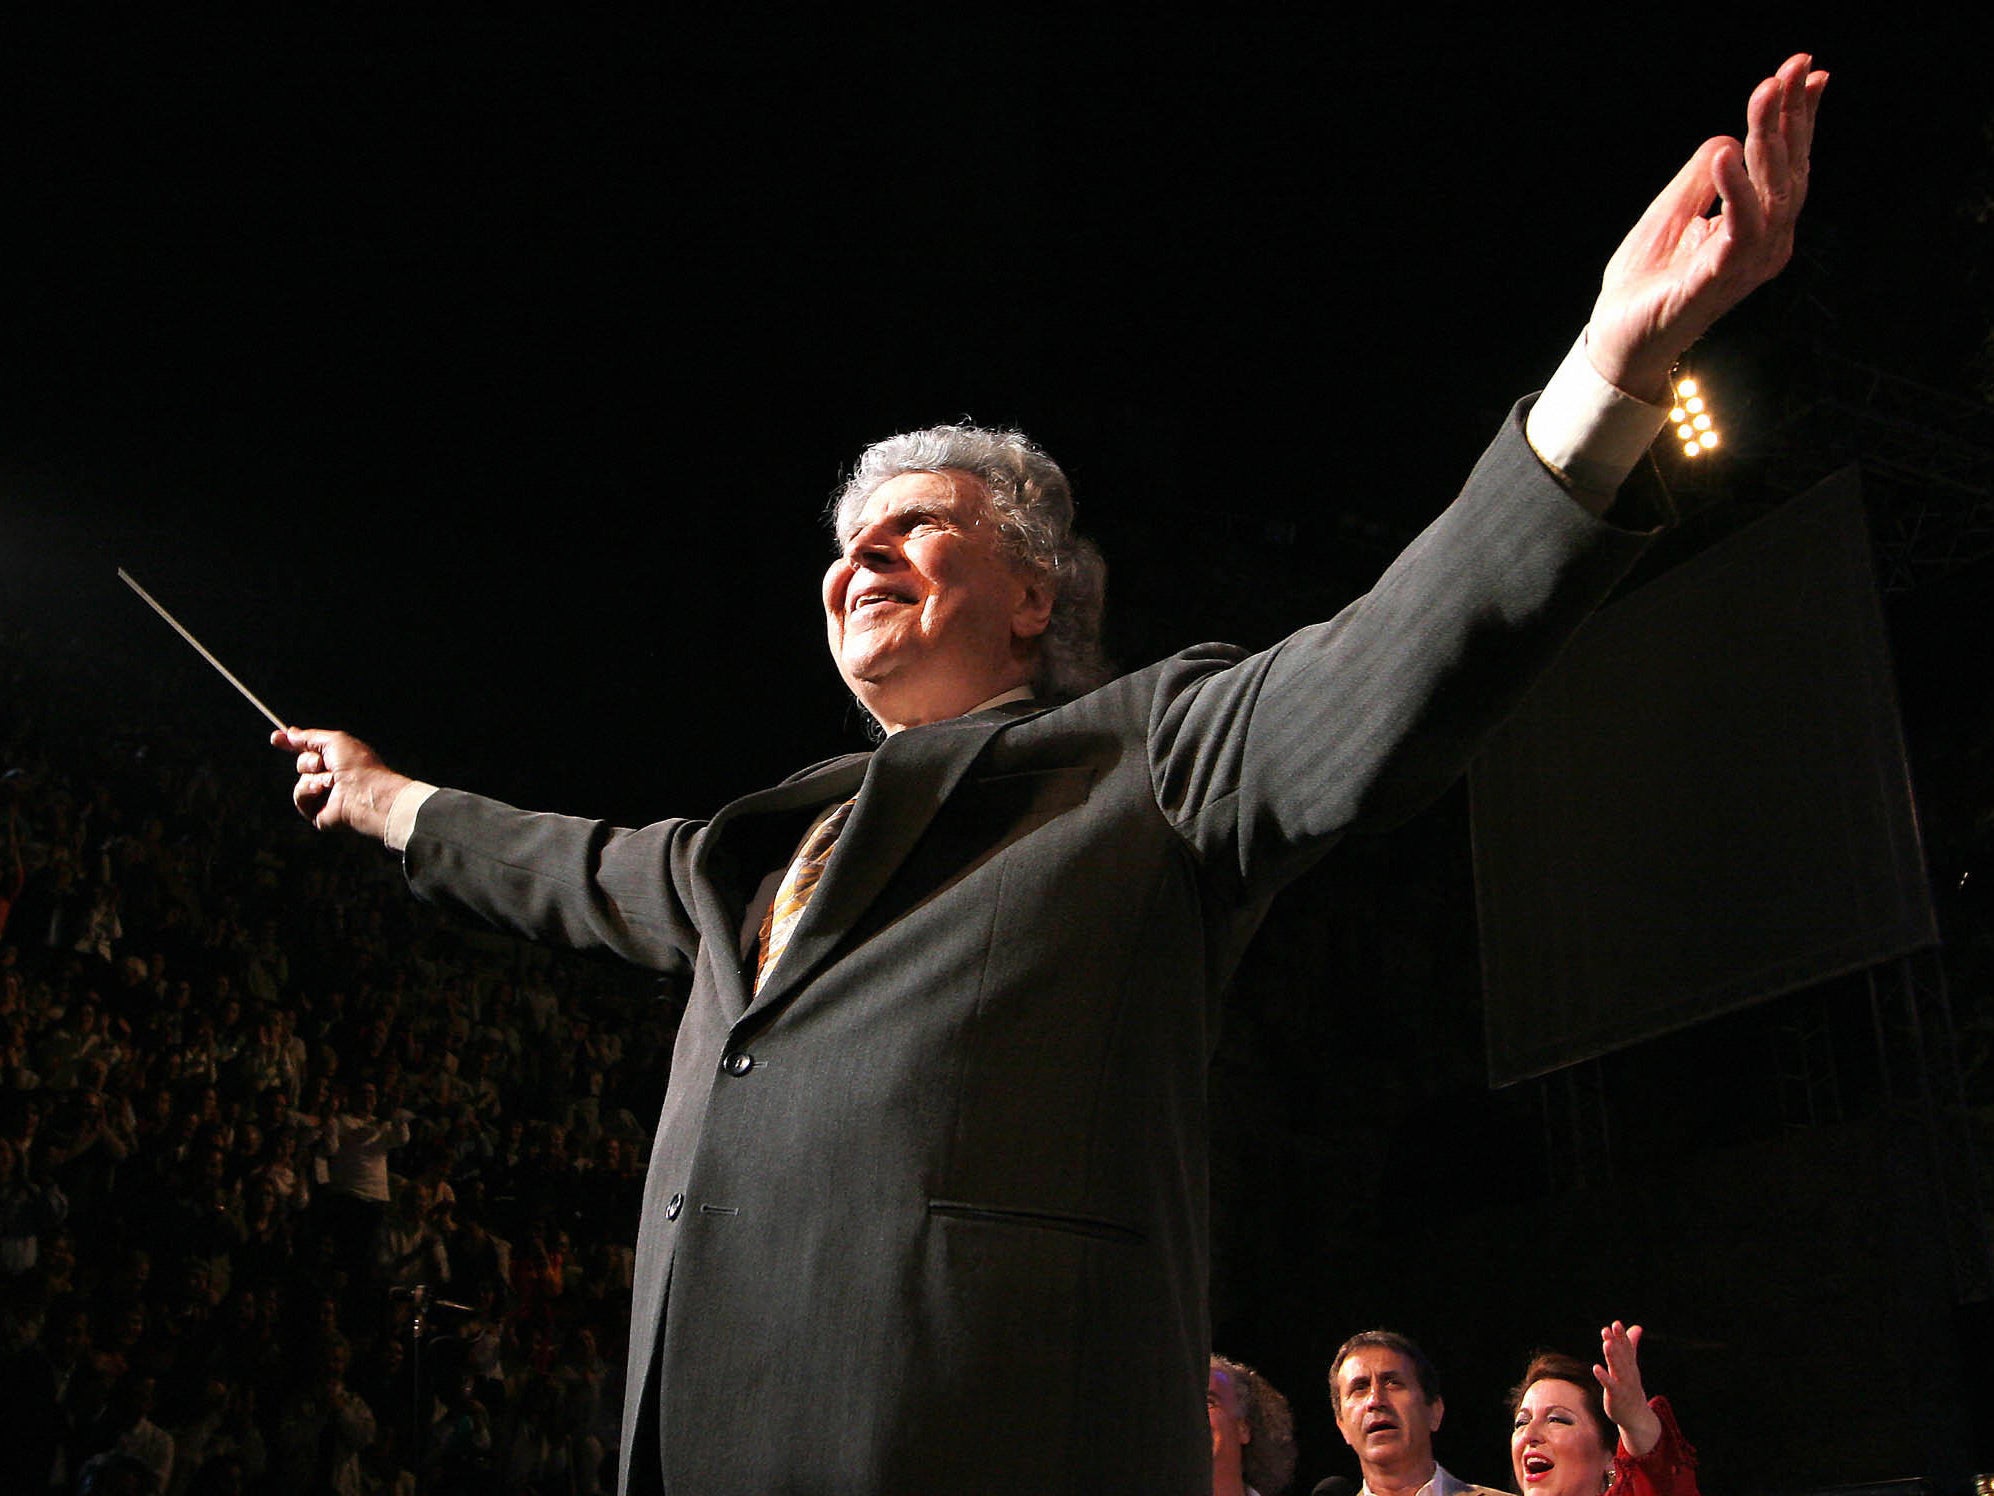 Theodorakis directing his orchestra during a gala concert at the Herodes Atticus Ancient Theatre in Athens